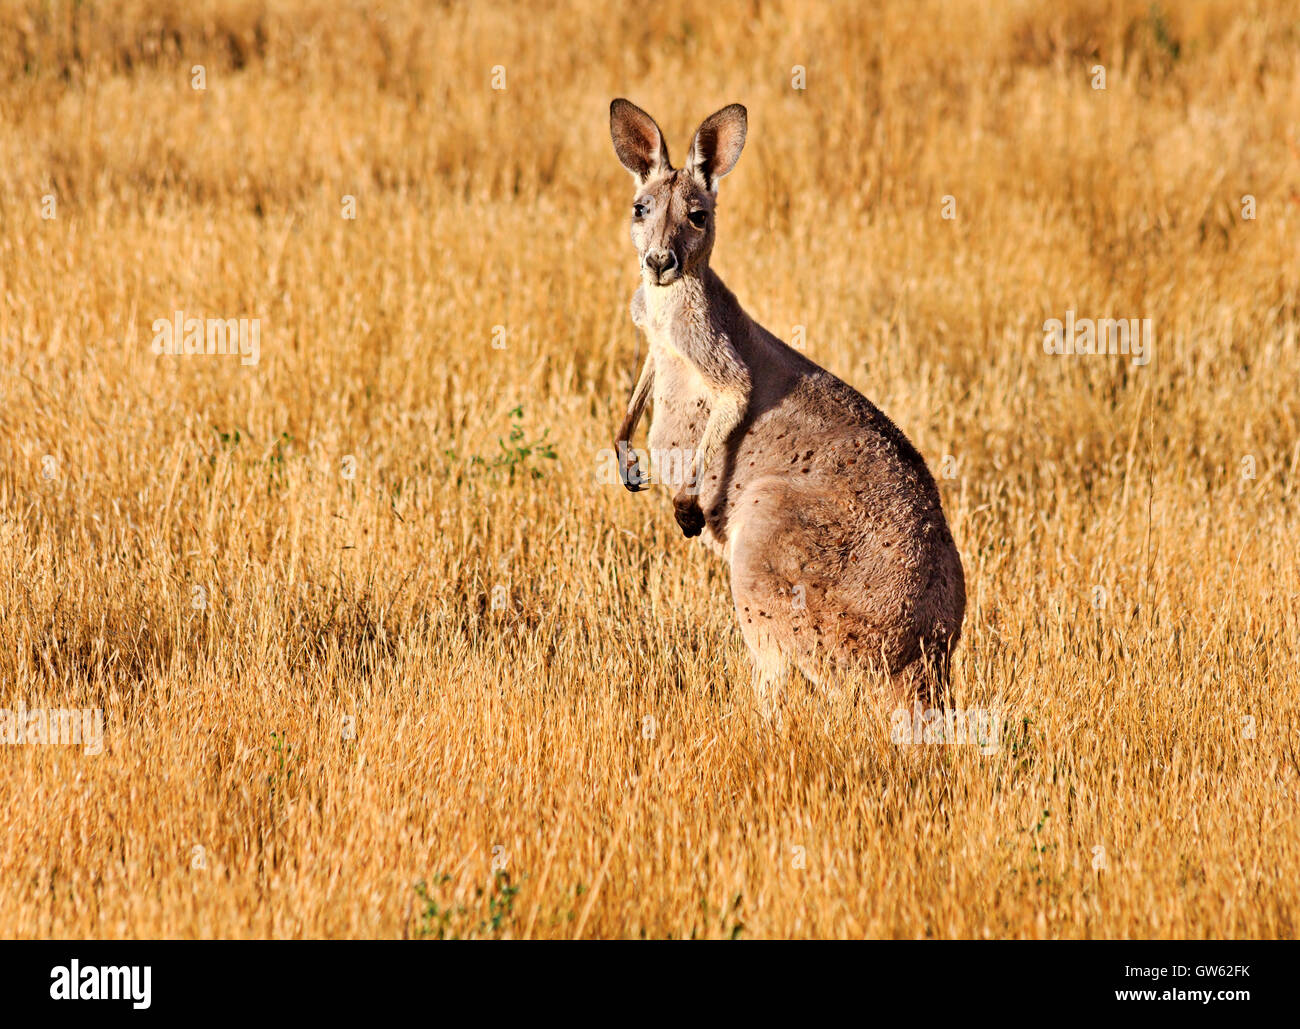 Tall standing brown kangaroo in the middle of yellow grass outback plain of South Australia Stock Photo